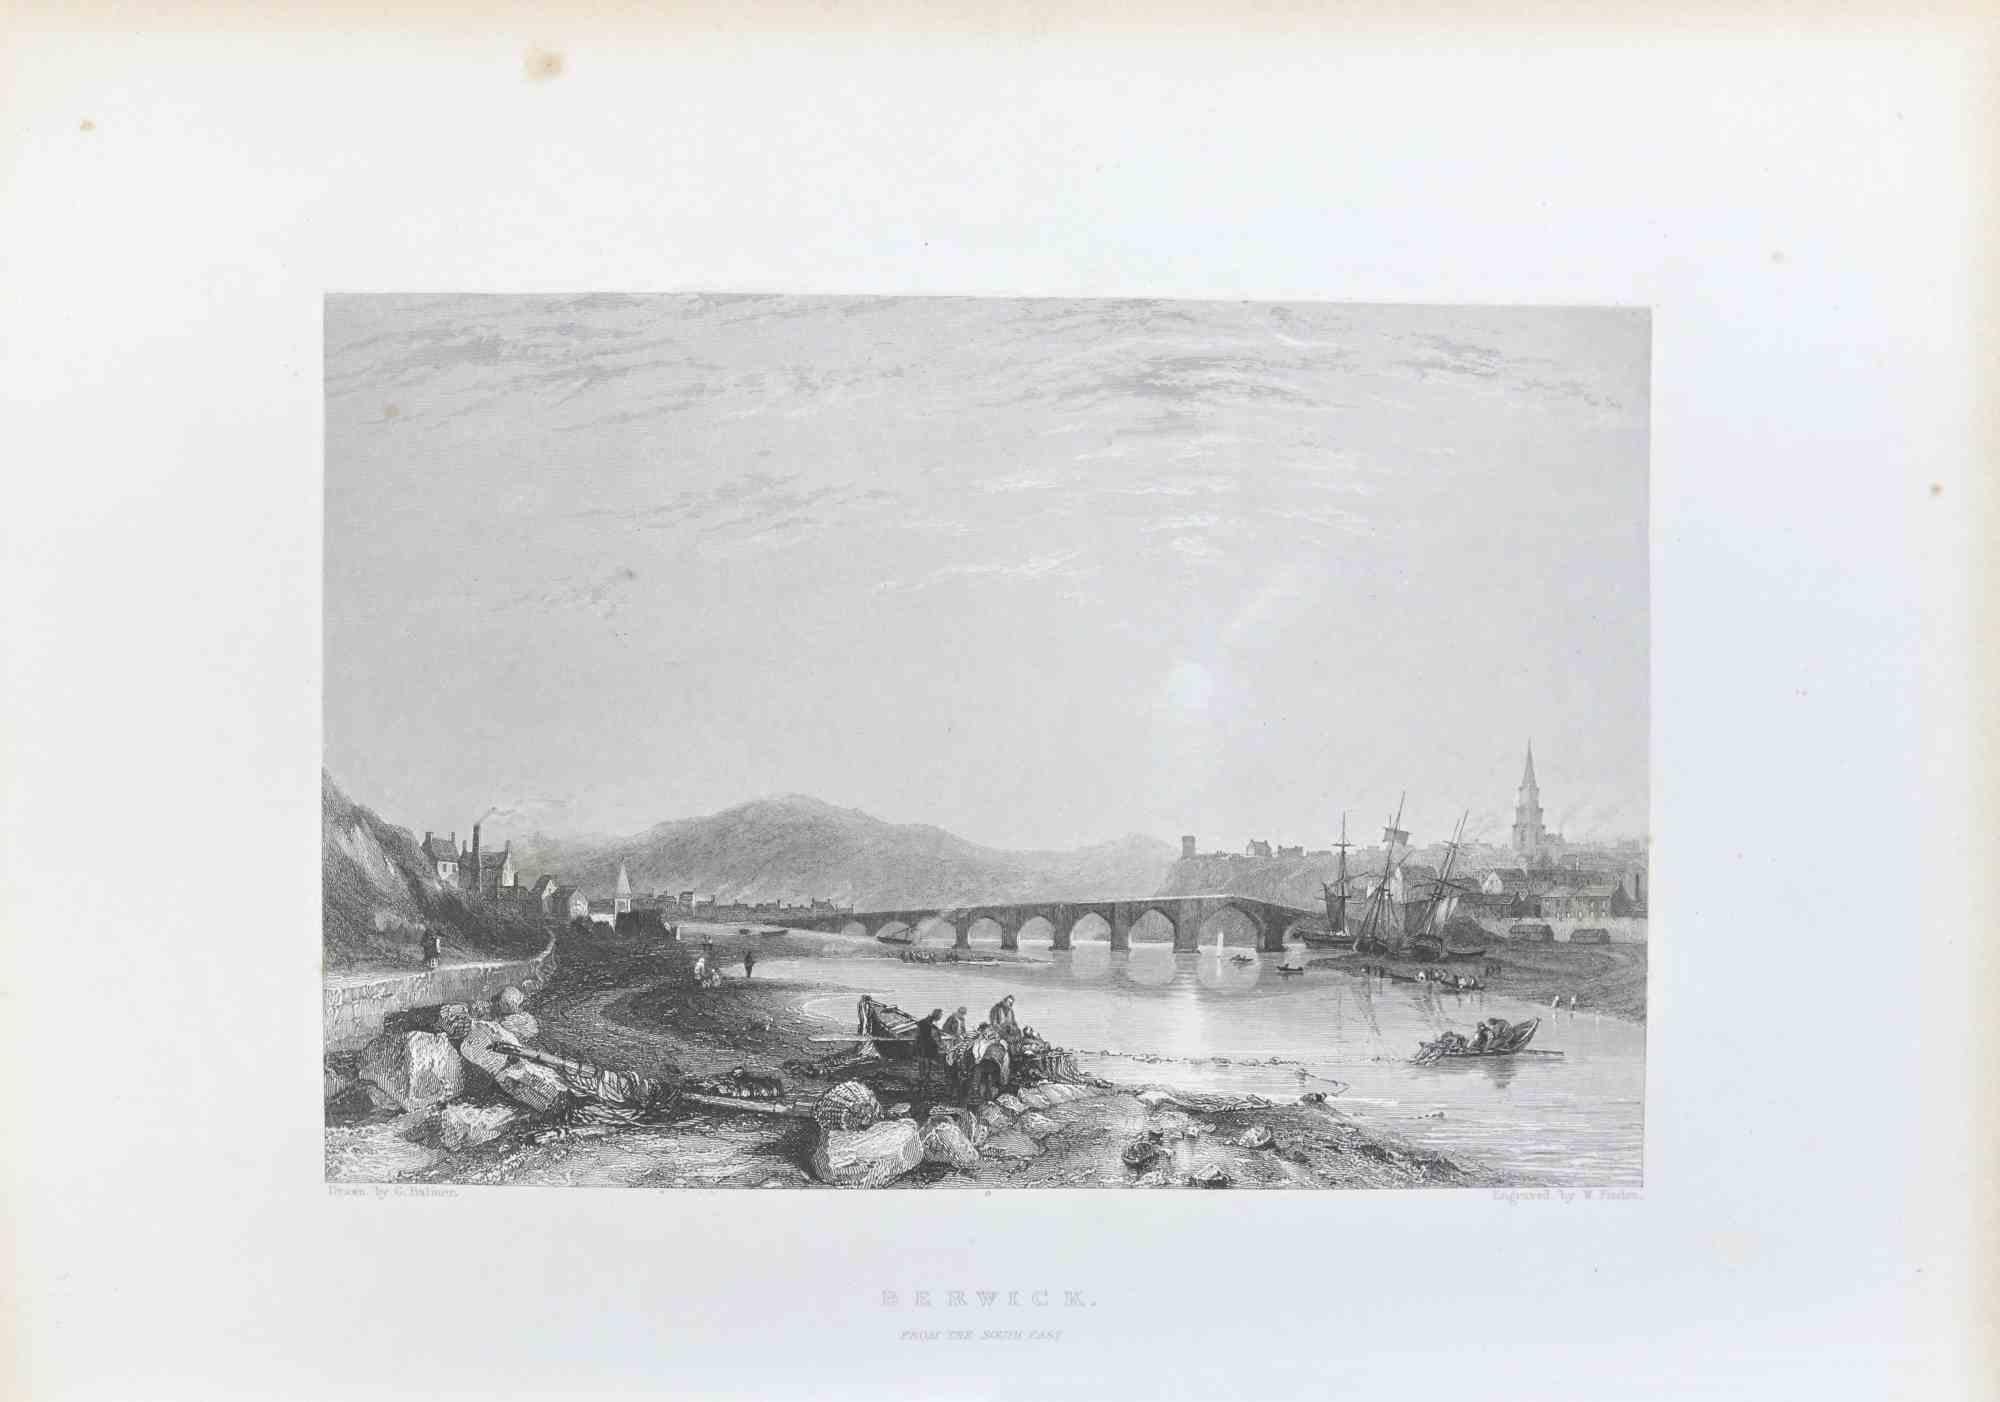 Berwick Head is an  engraving on paper realized by W.Finden in 1838.

The artwork is in good condition.

The artwork is depicted in a well-balanced composition.